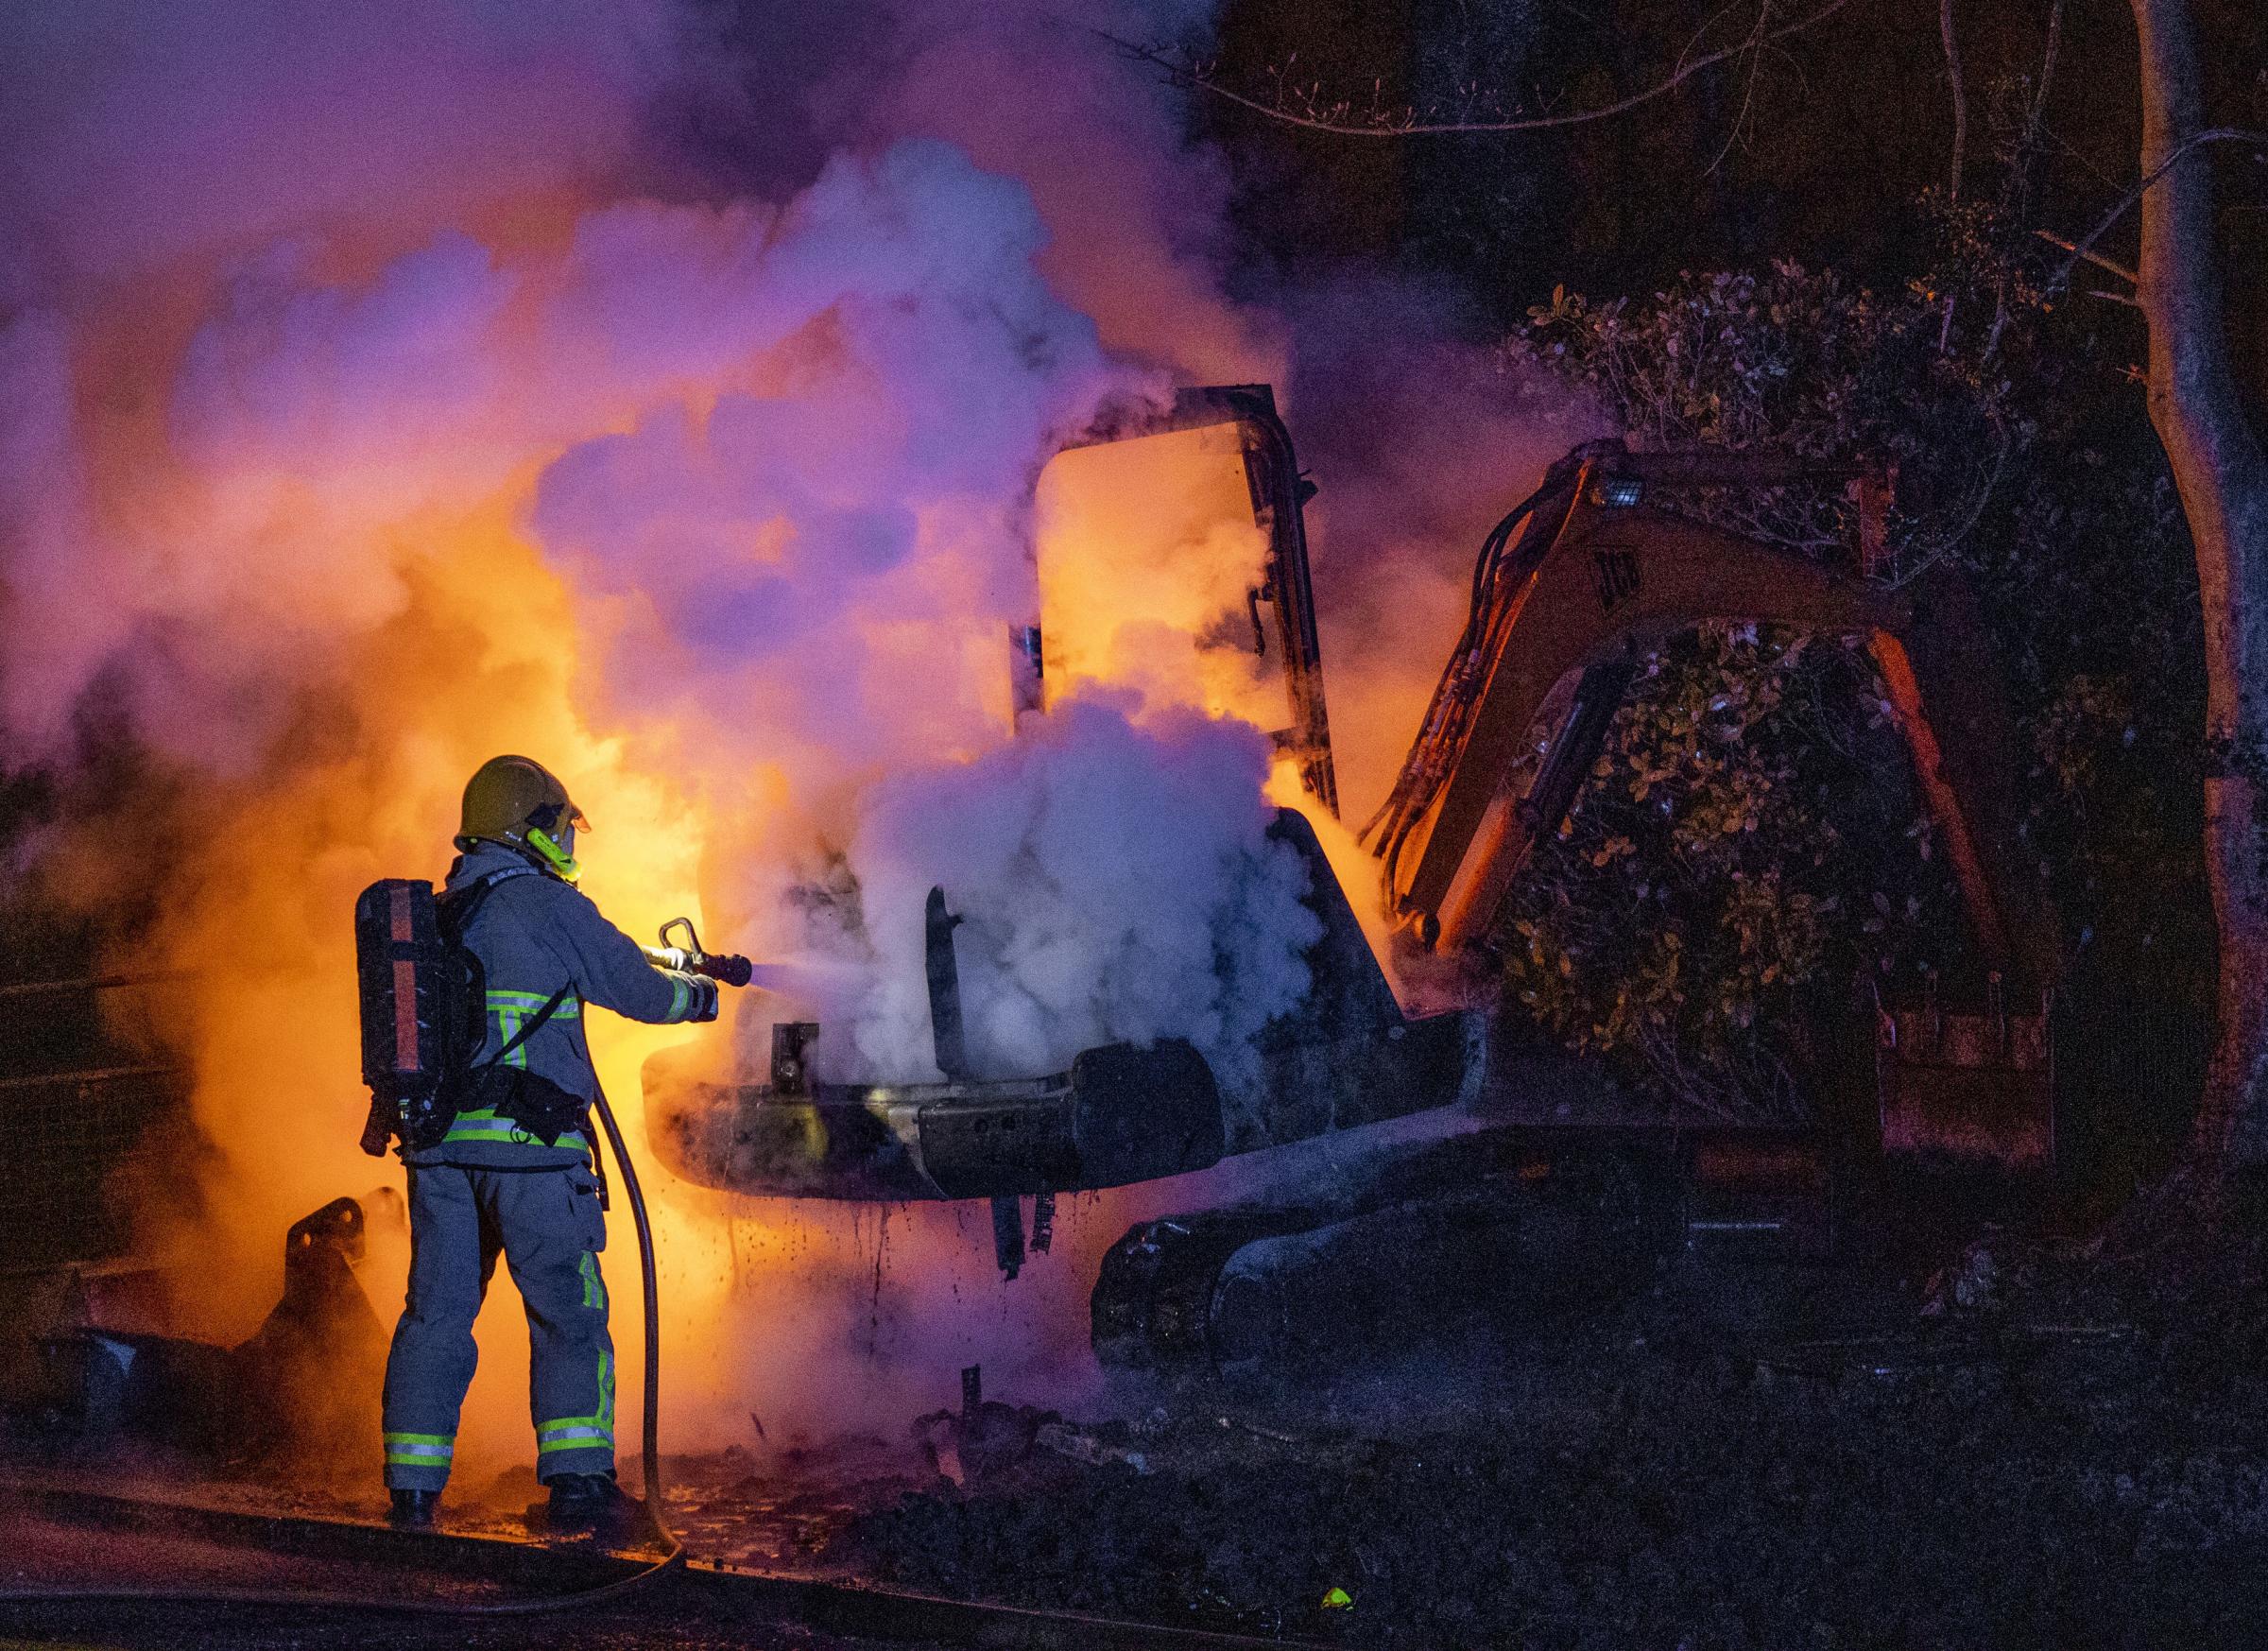 A member of the Northern Ireland Fire and Rescue Service (NIFRS) extinguishes a JCB digger which has been set alight close to the Loyalist Nelson Drive Estate in the Waterside of Derry City, Co. Londonderry Picture: LIAM MCBURNEY/PA.